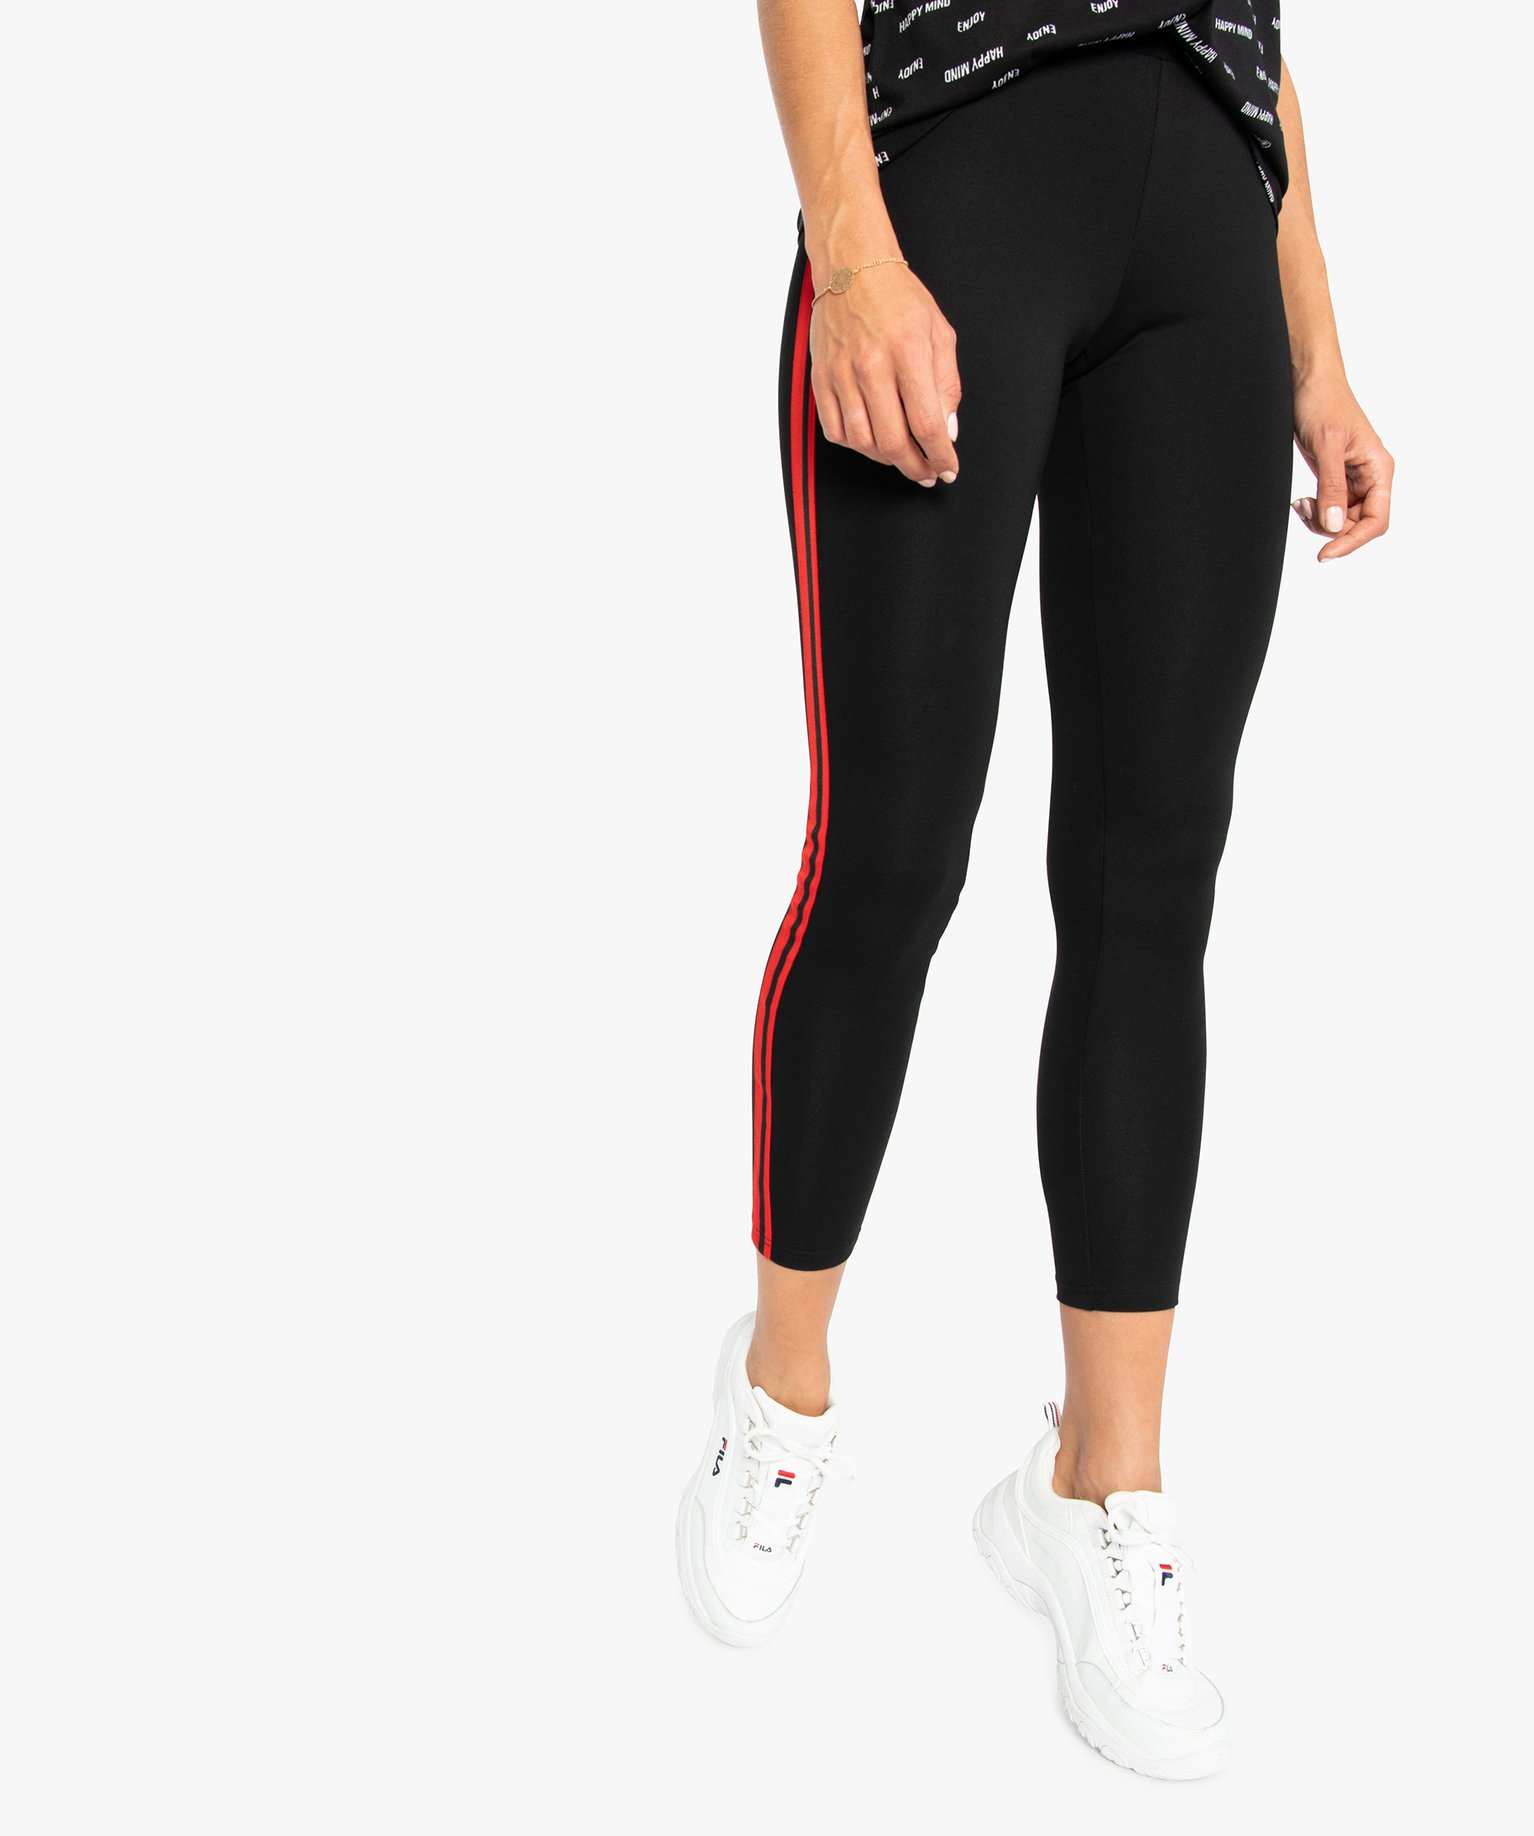 legging femme effet push-up a bandes laterales rayees noir